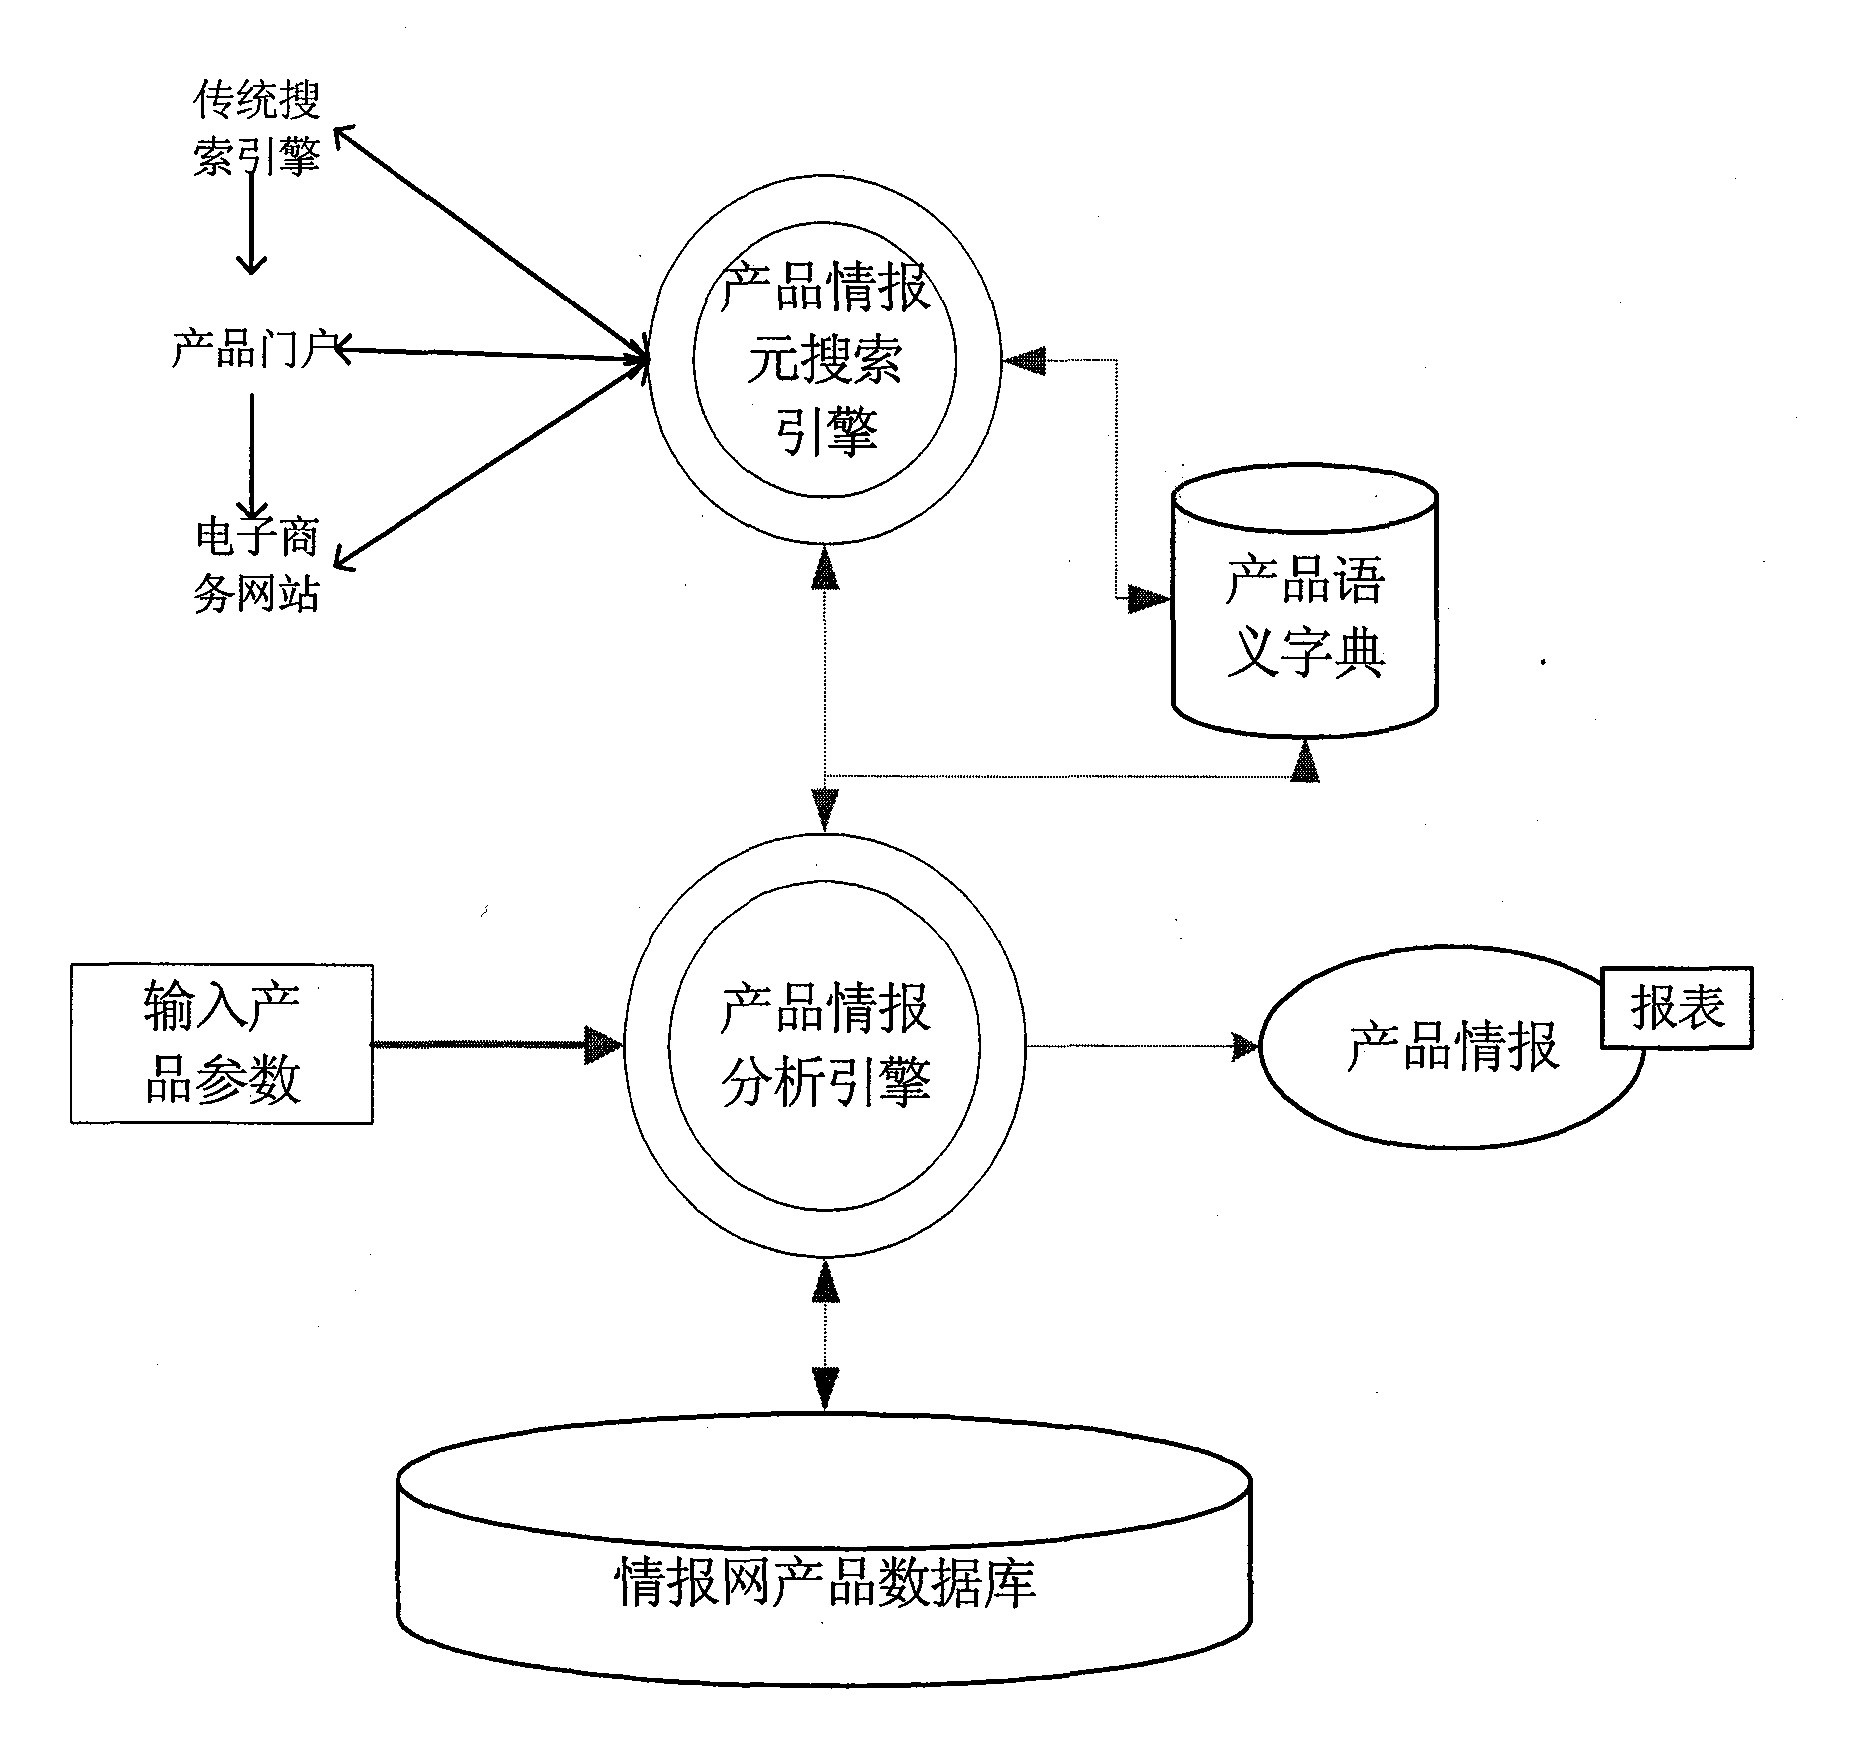 Online retrieval and intelligent analysis method and system of product information